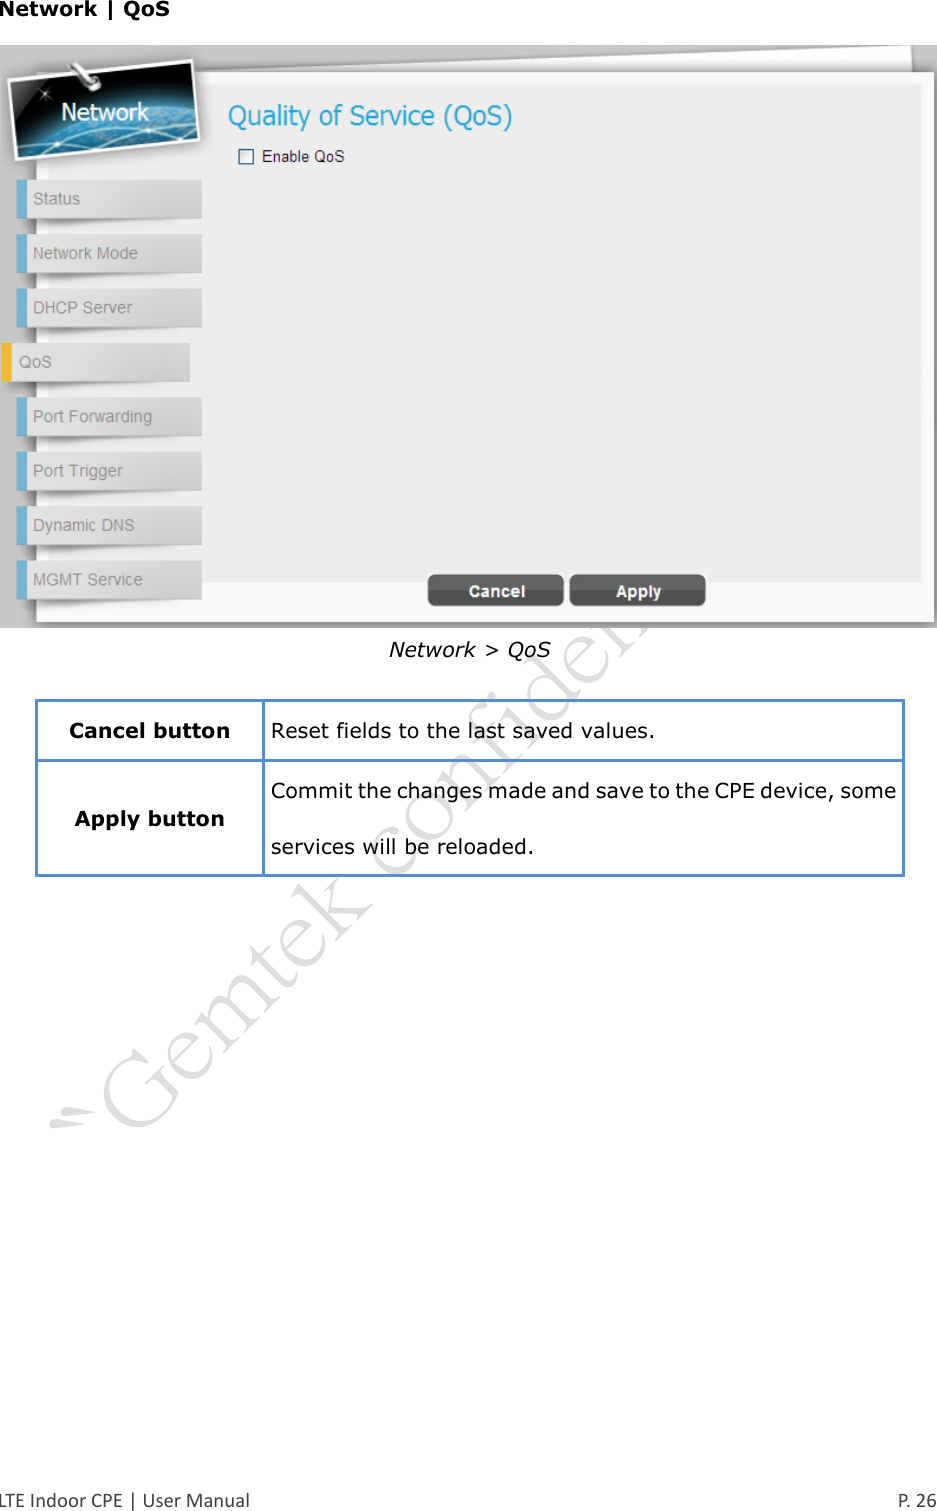  LTE Indoor CPE | User Manual      P. 26 Network | QoS  Network &gt; QoS  Cancel button Reset fields to the last saved values. Apply button Commit the changes made and save to the CPE device, some services will be reloaded.  